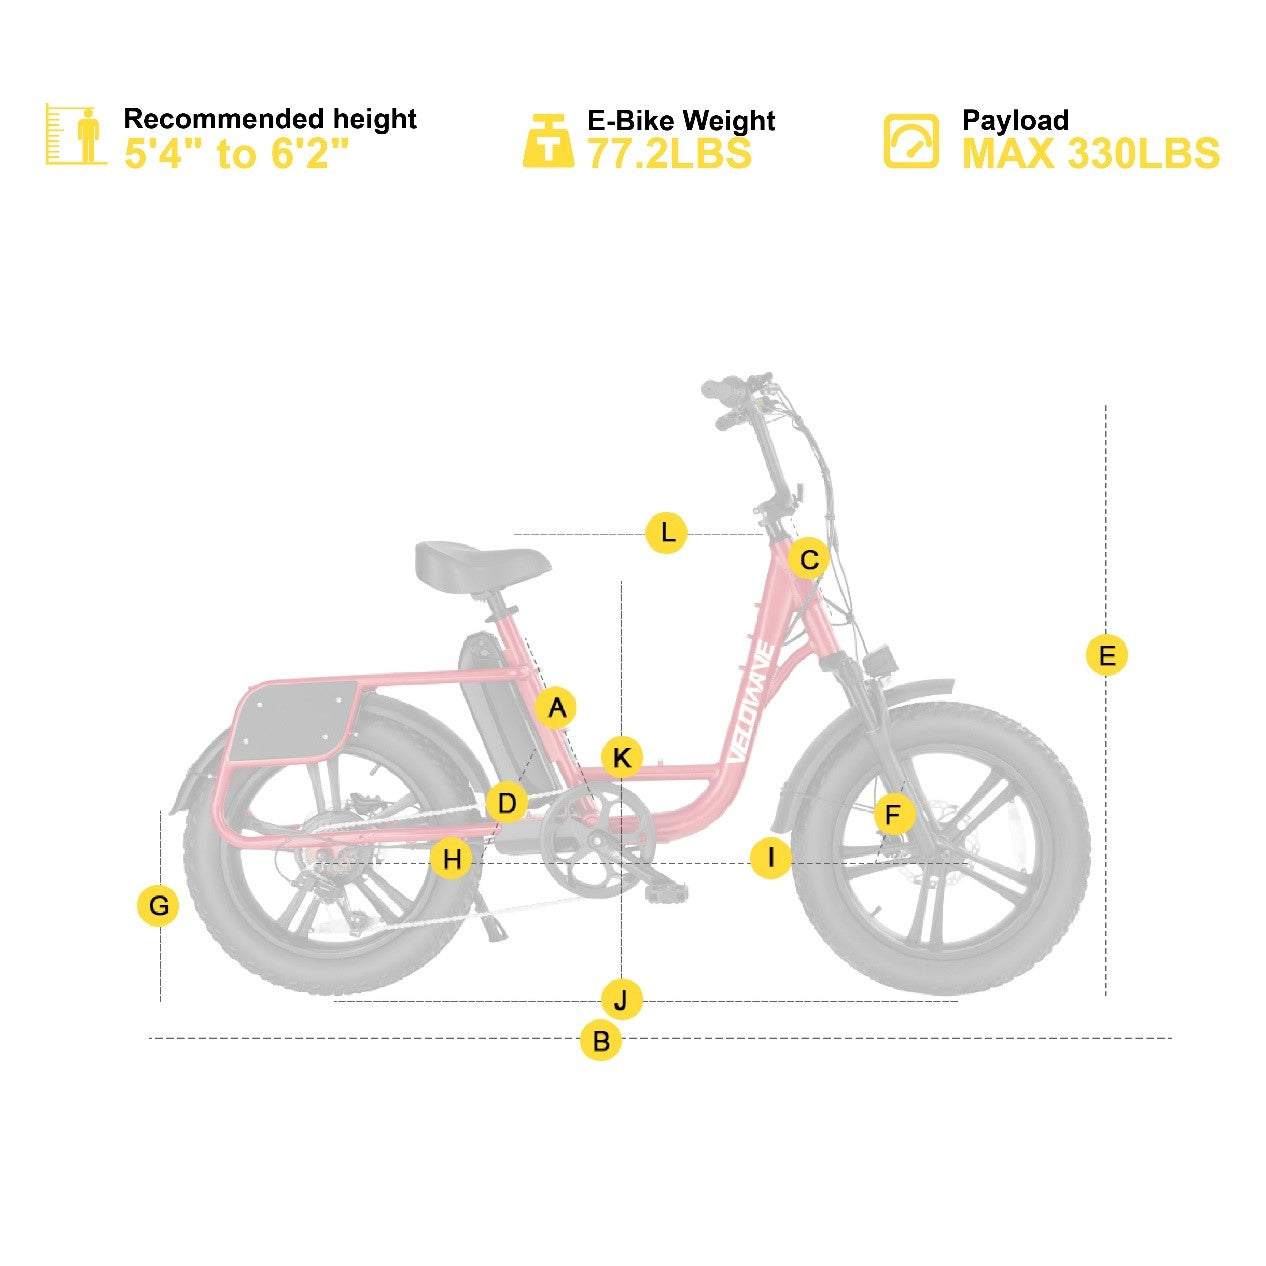 Size and Parameter for Velowave Parado S Electric Bike